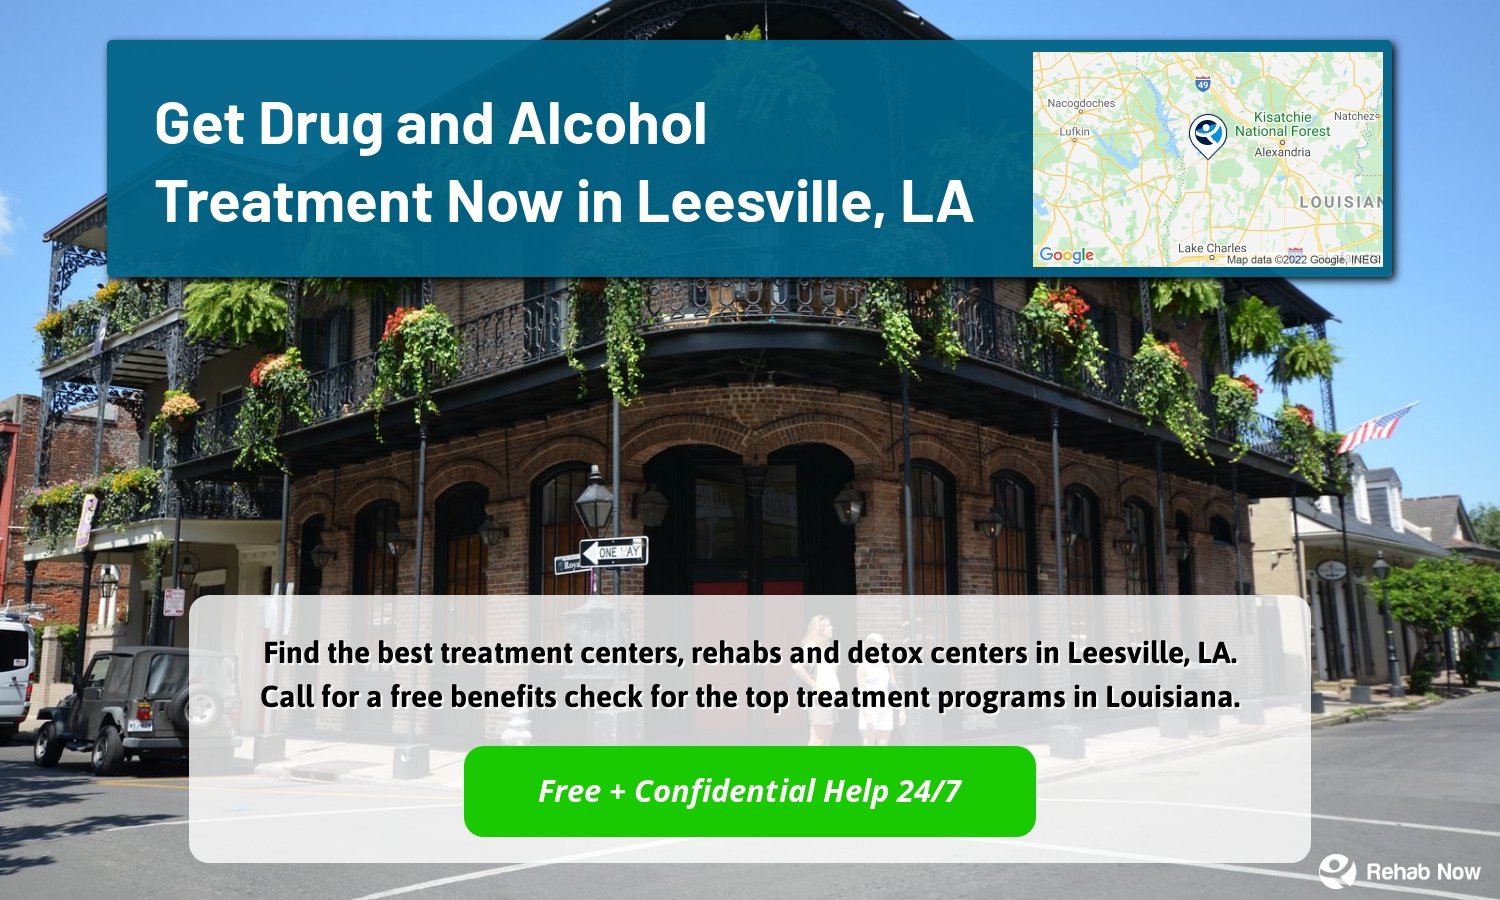 Find the best treatment centers, rehabs and detox centers in Leesville, LA. Call for a free benefits check for the top treatment programs in Louisiana.